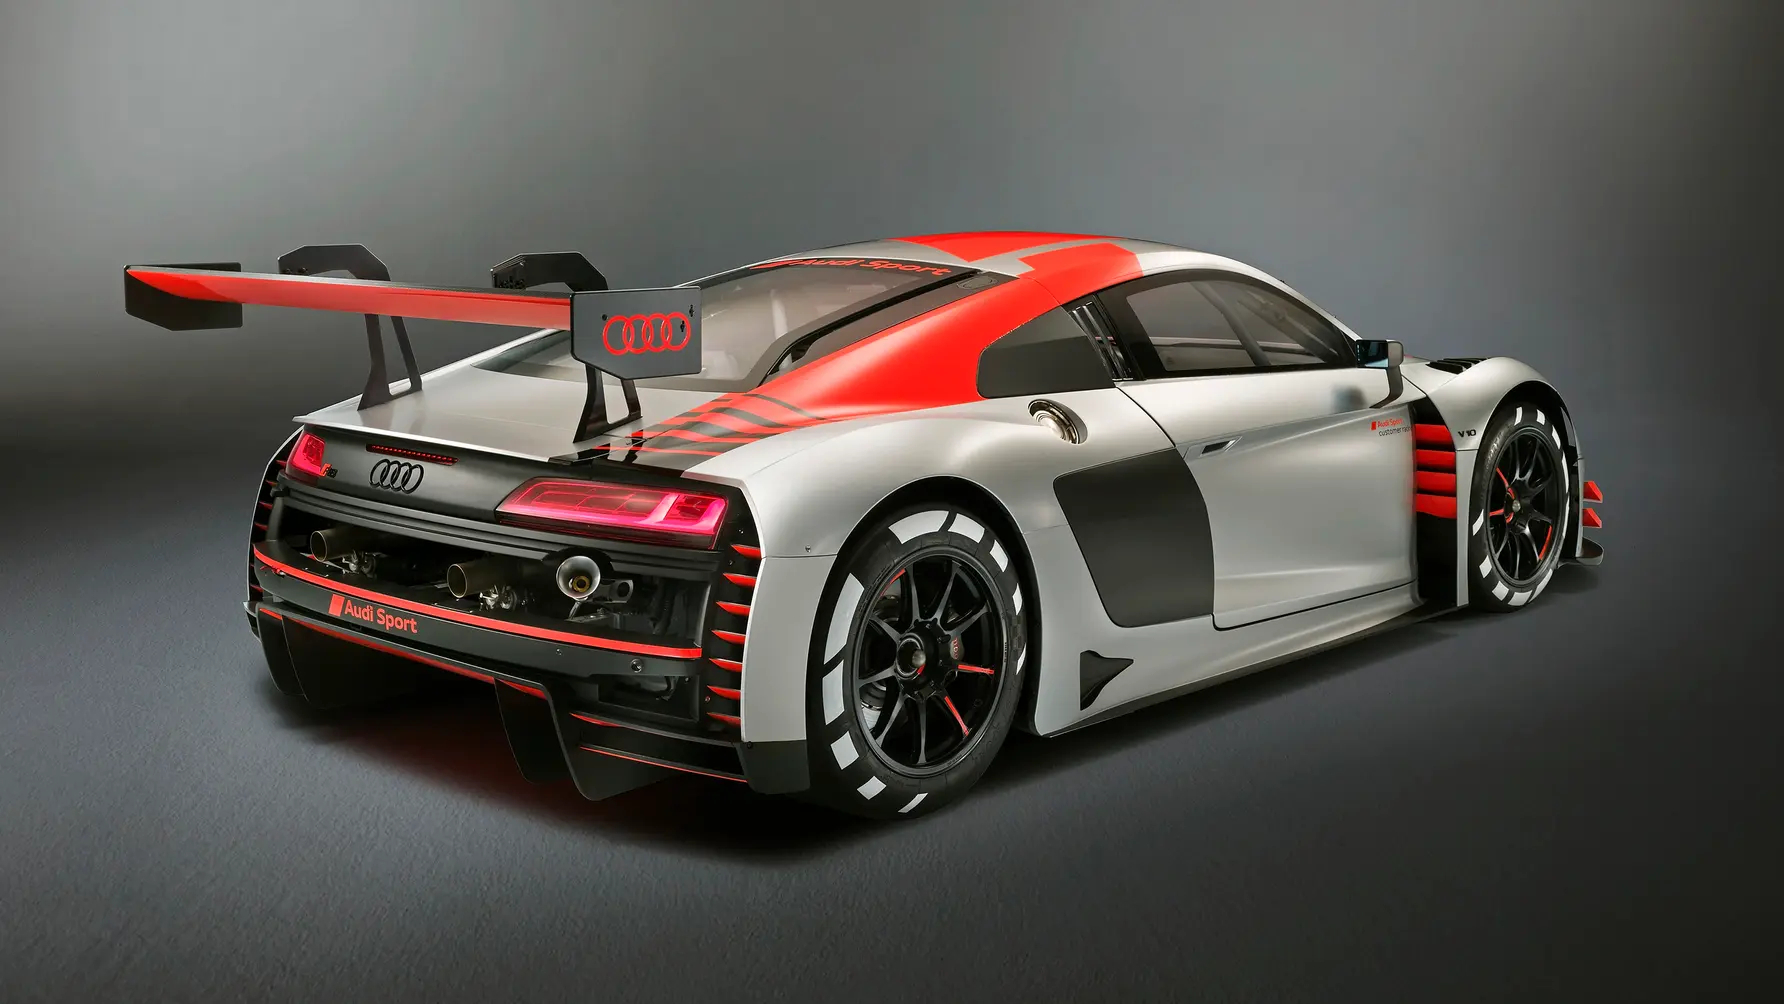 Rear-angled view of an Audi R8 LMS GT3 race car finished in red, white and black livery.